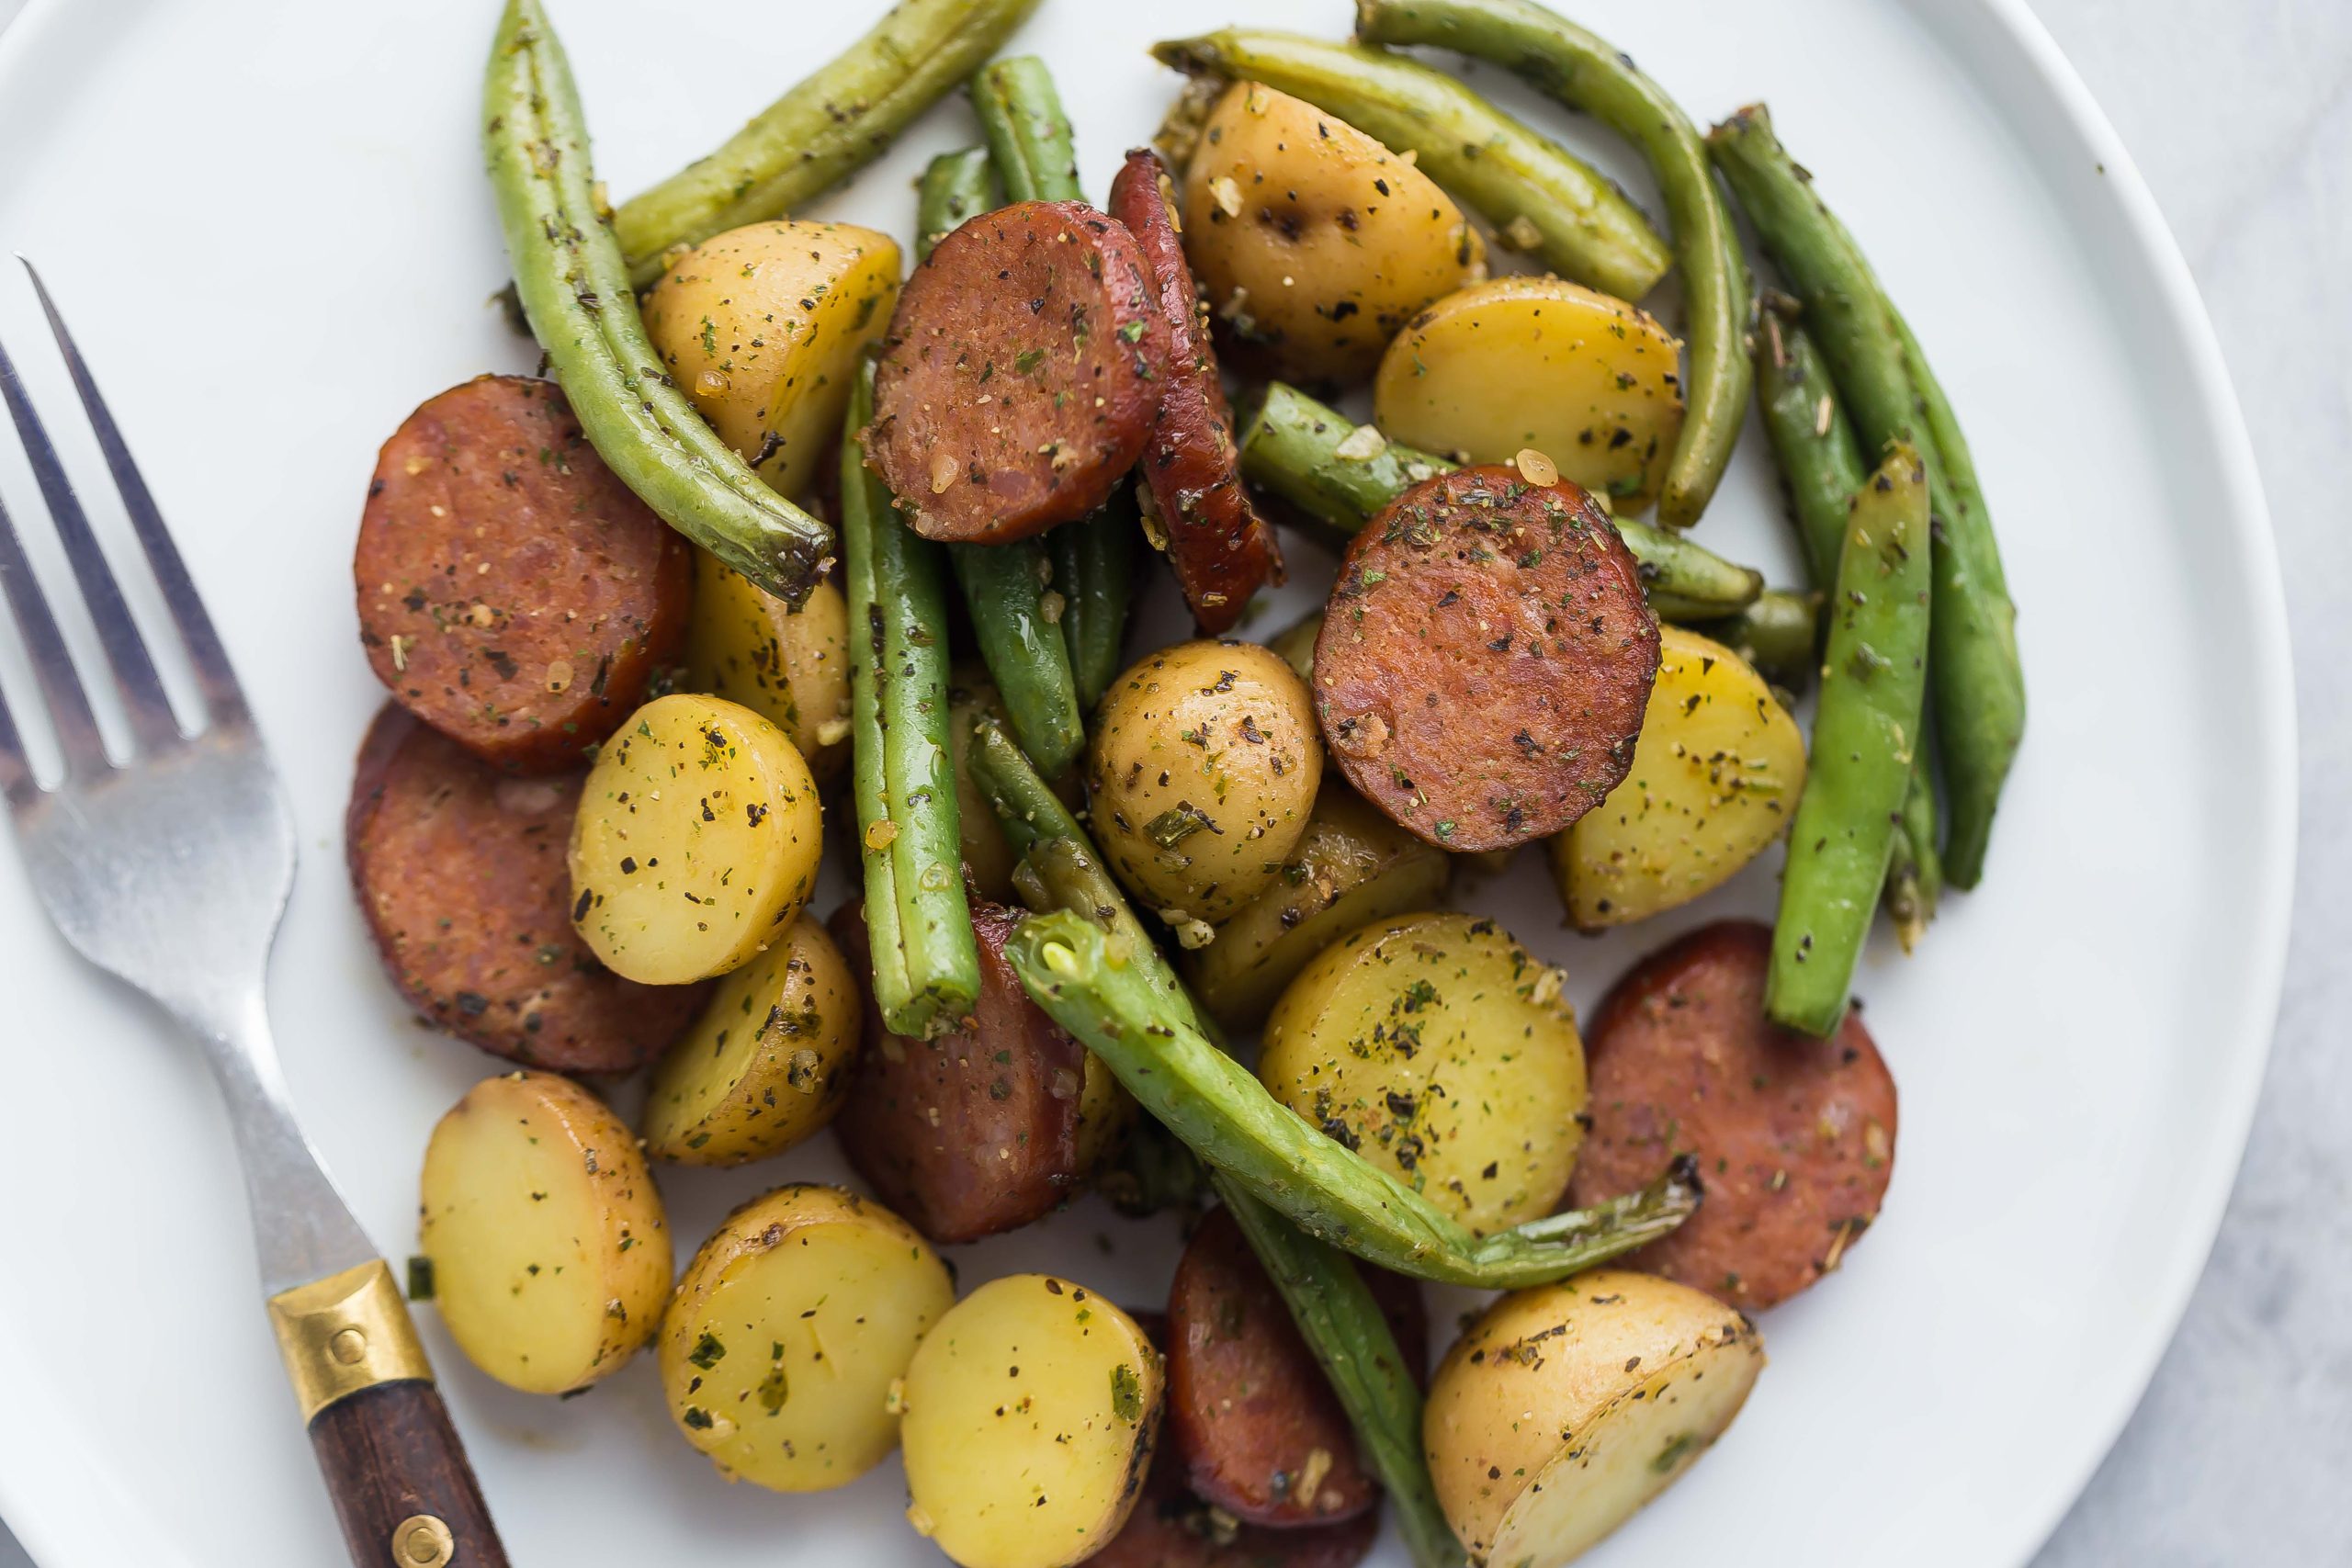 https://www.littlepotatoes.com/wp-content/uploads/2019/08/One-Pan-Sausage-Potatoes-and-Green-Beans_Ashley-Fehr_Web-Res-5-scaled.jpg